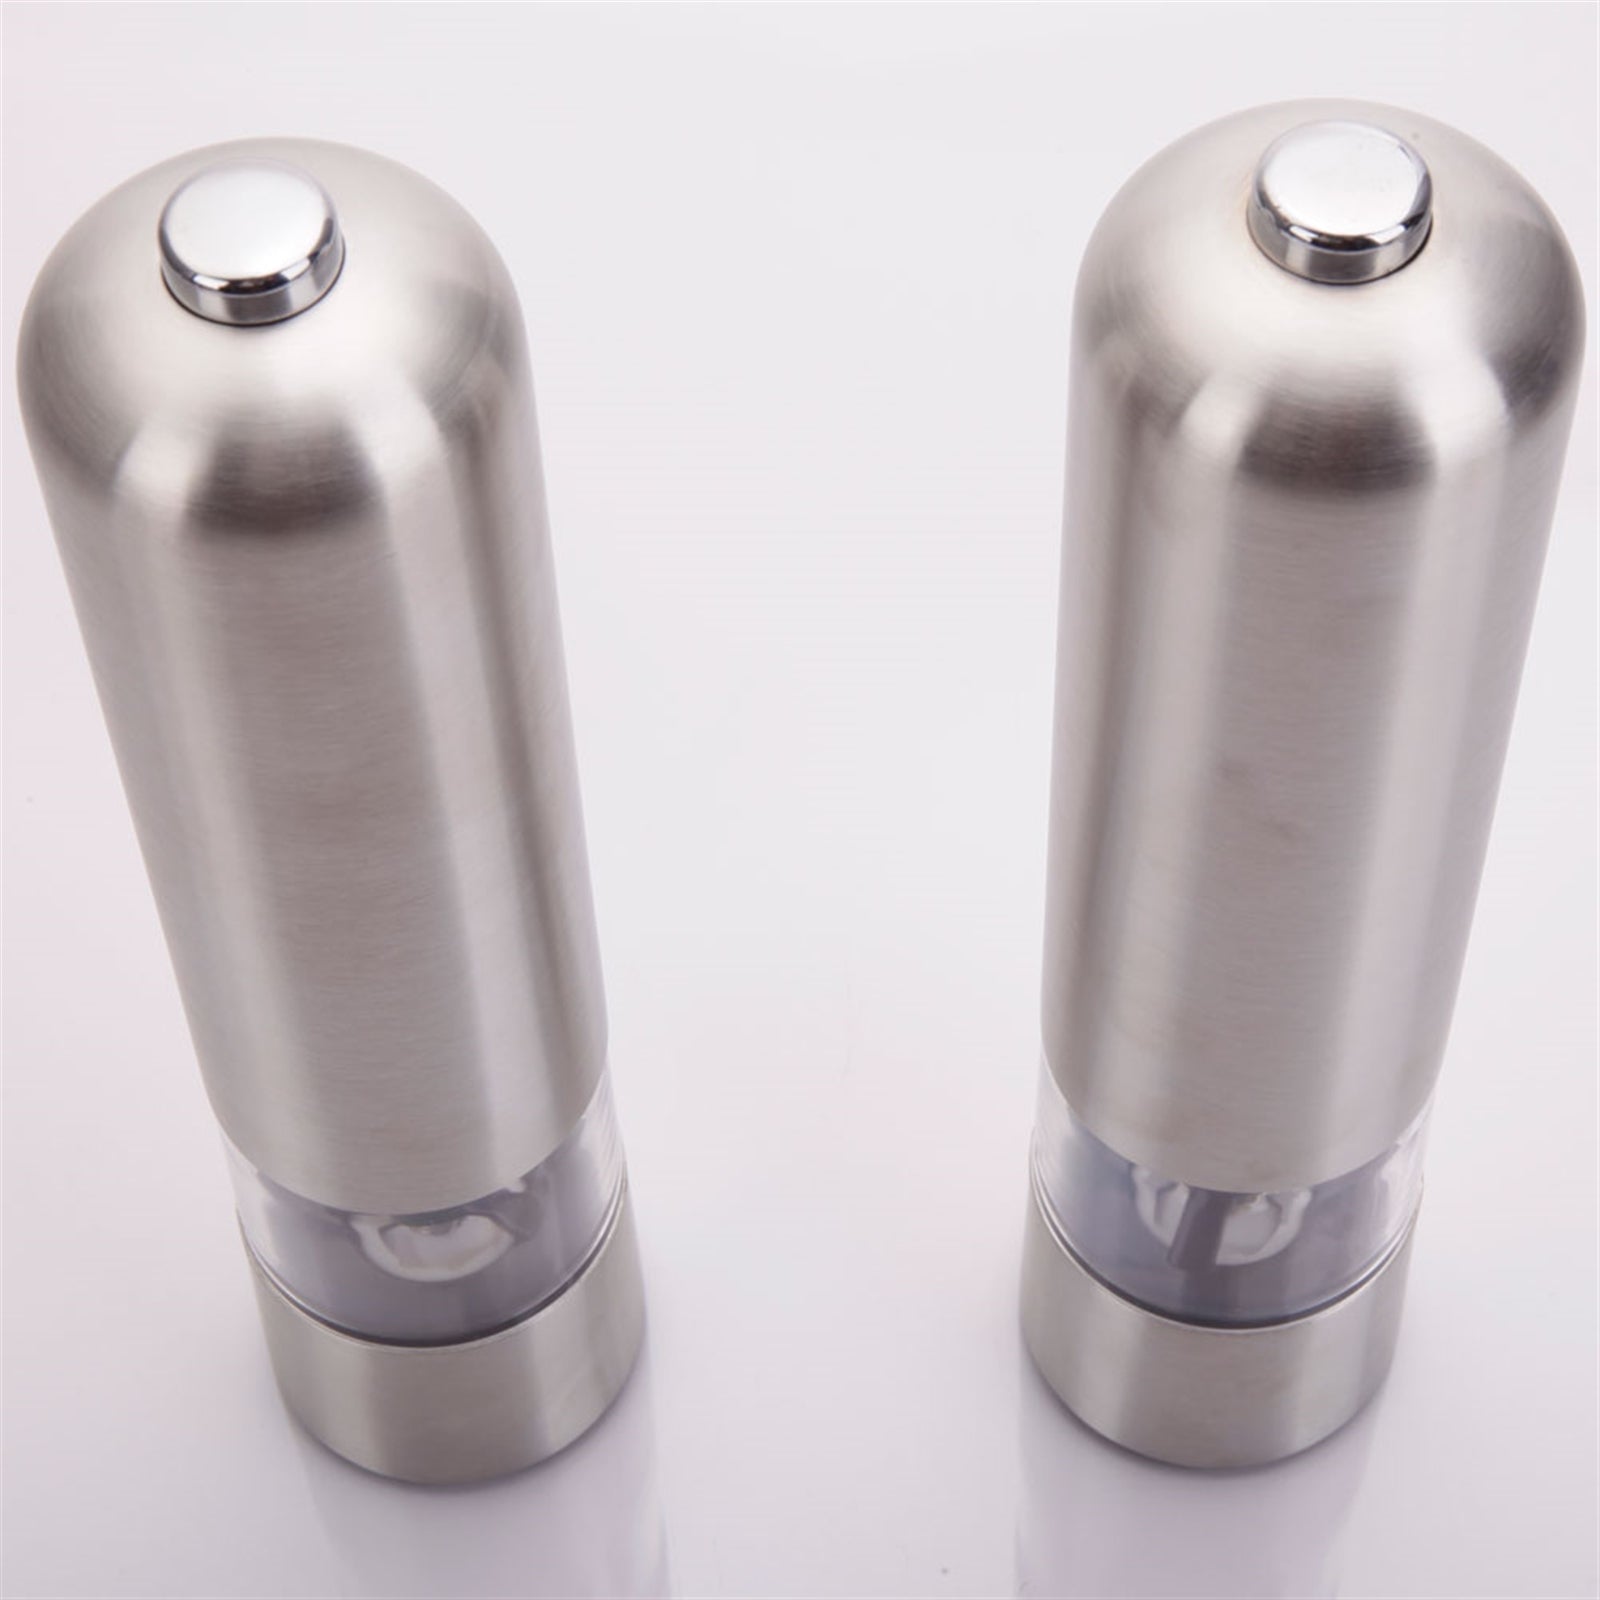 L'Chaim Meats 2pcs Stainless Steel Electric Automatic Pepper Mills